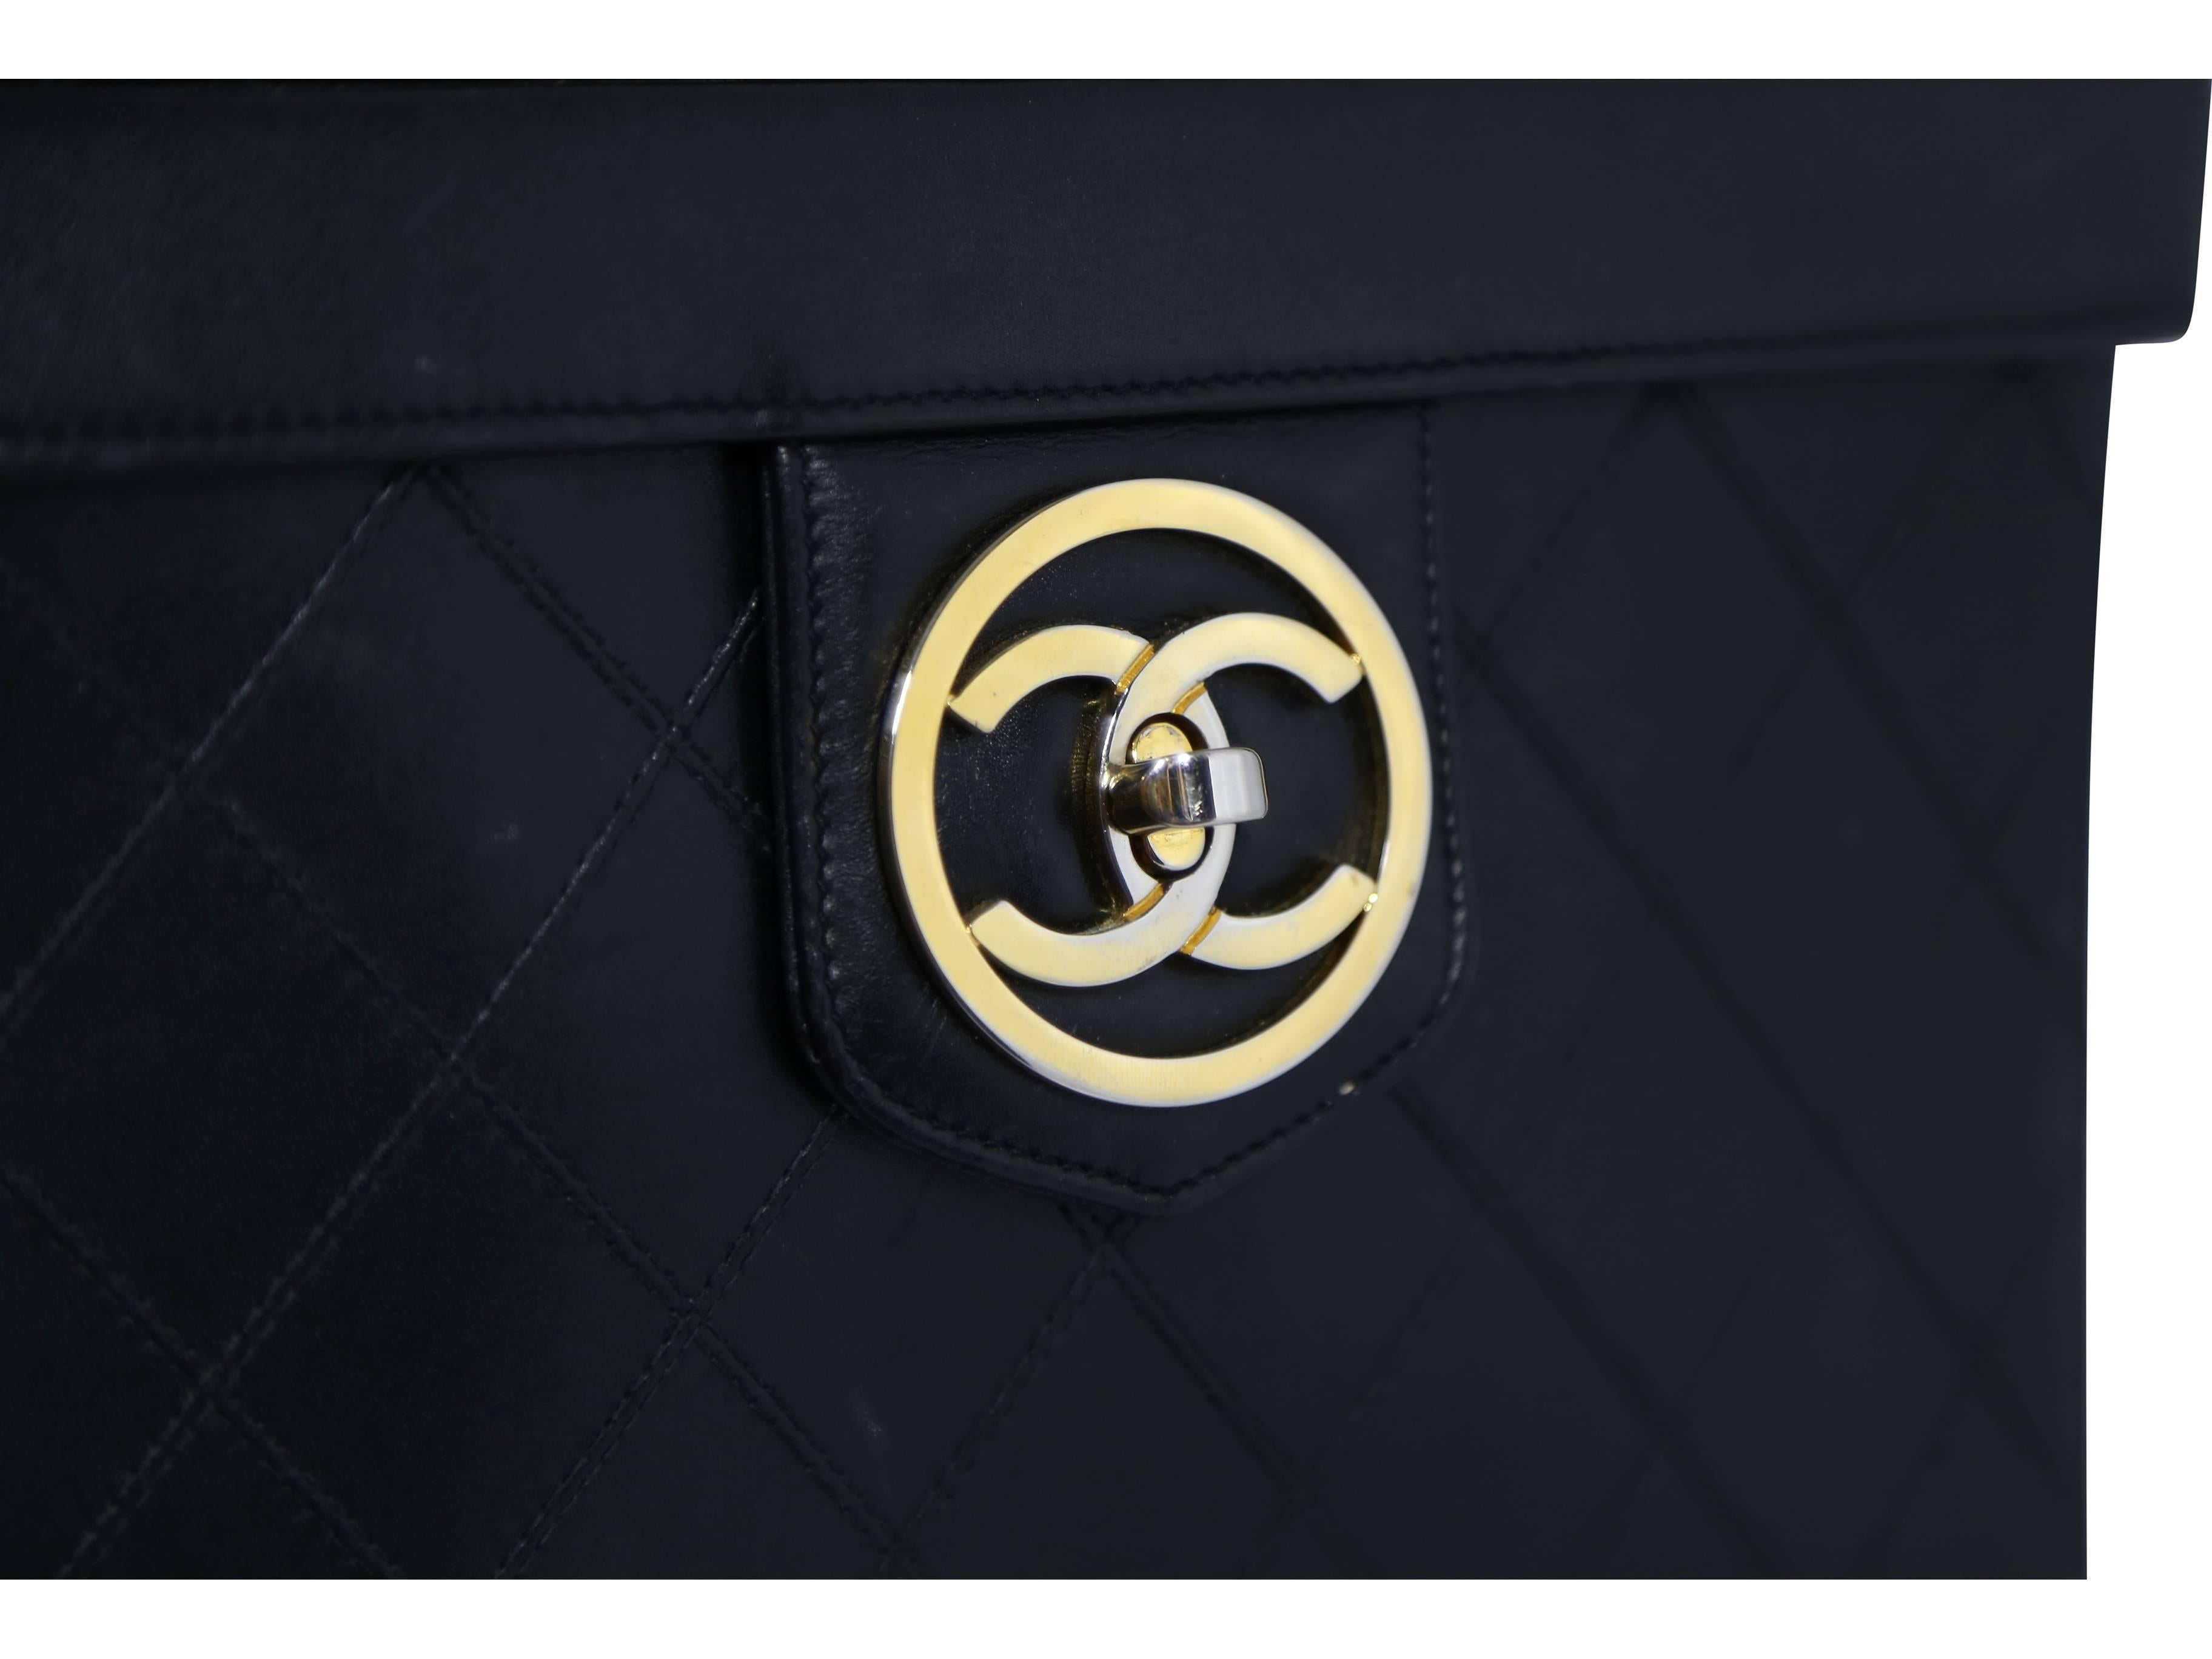 Chanel black leather trunk case with gold CC logo on front. 